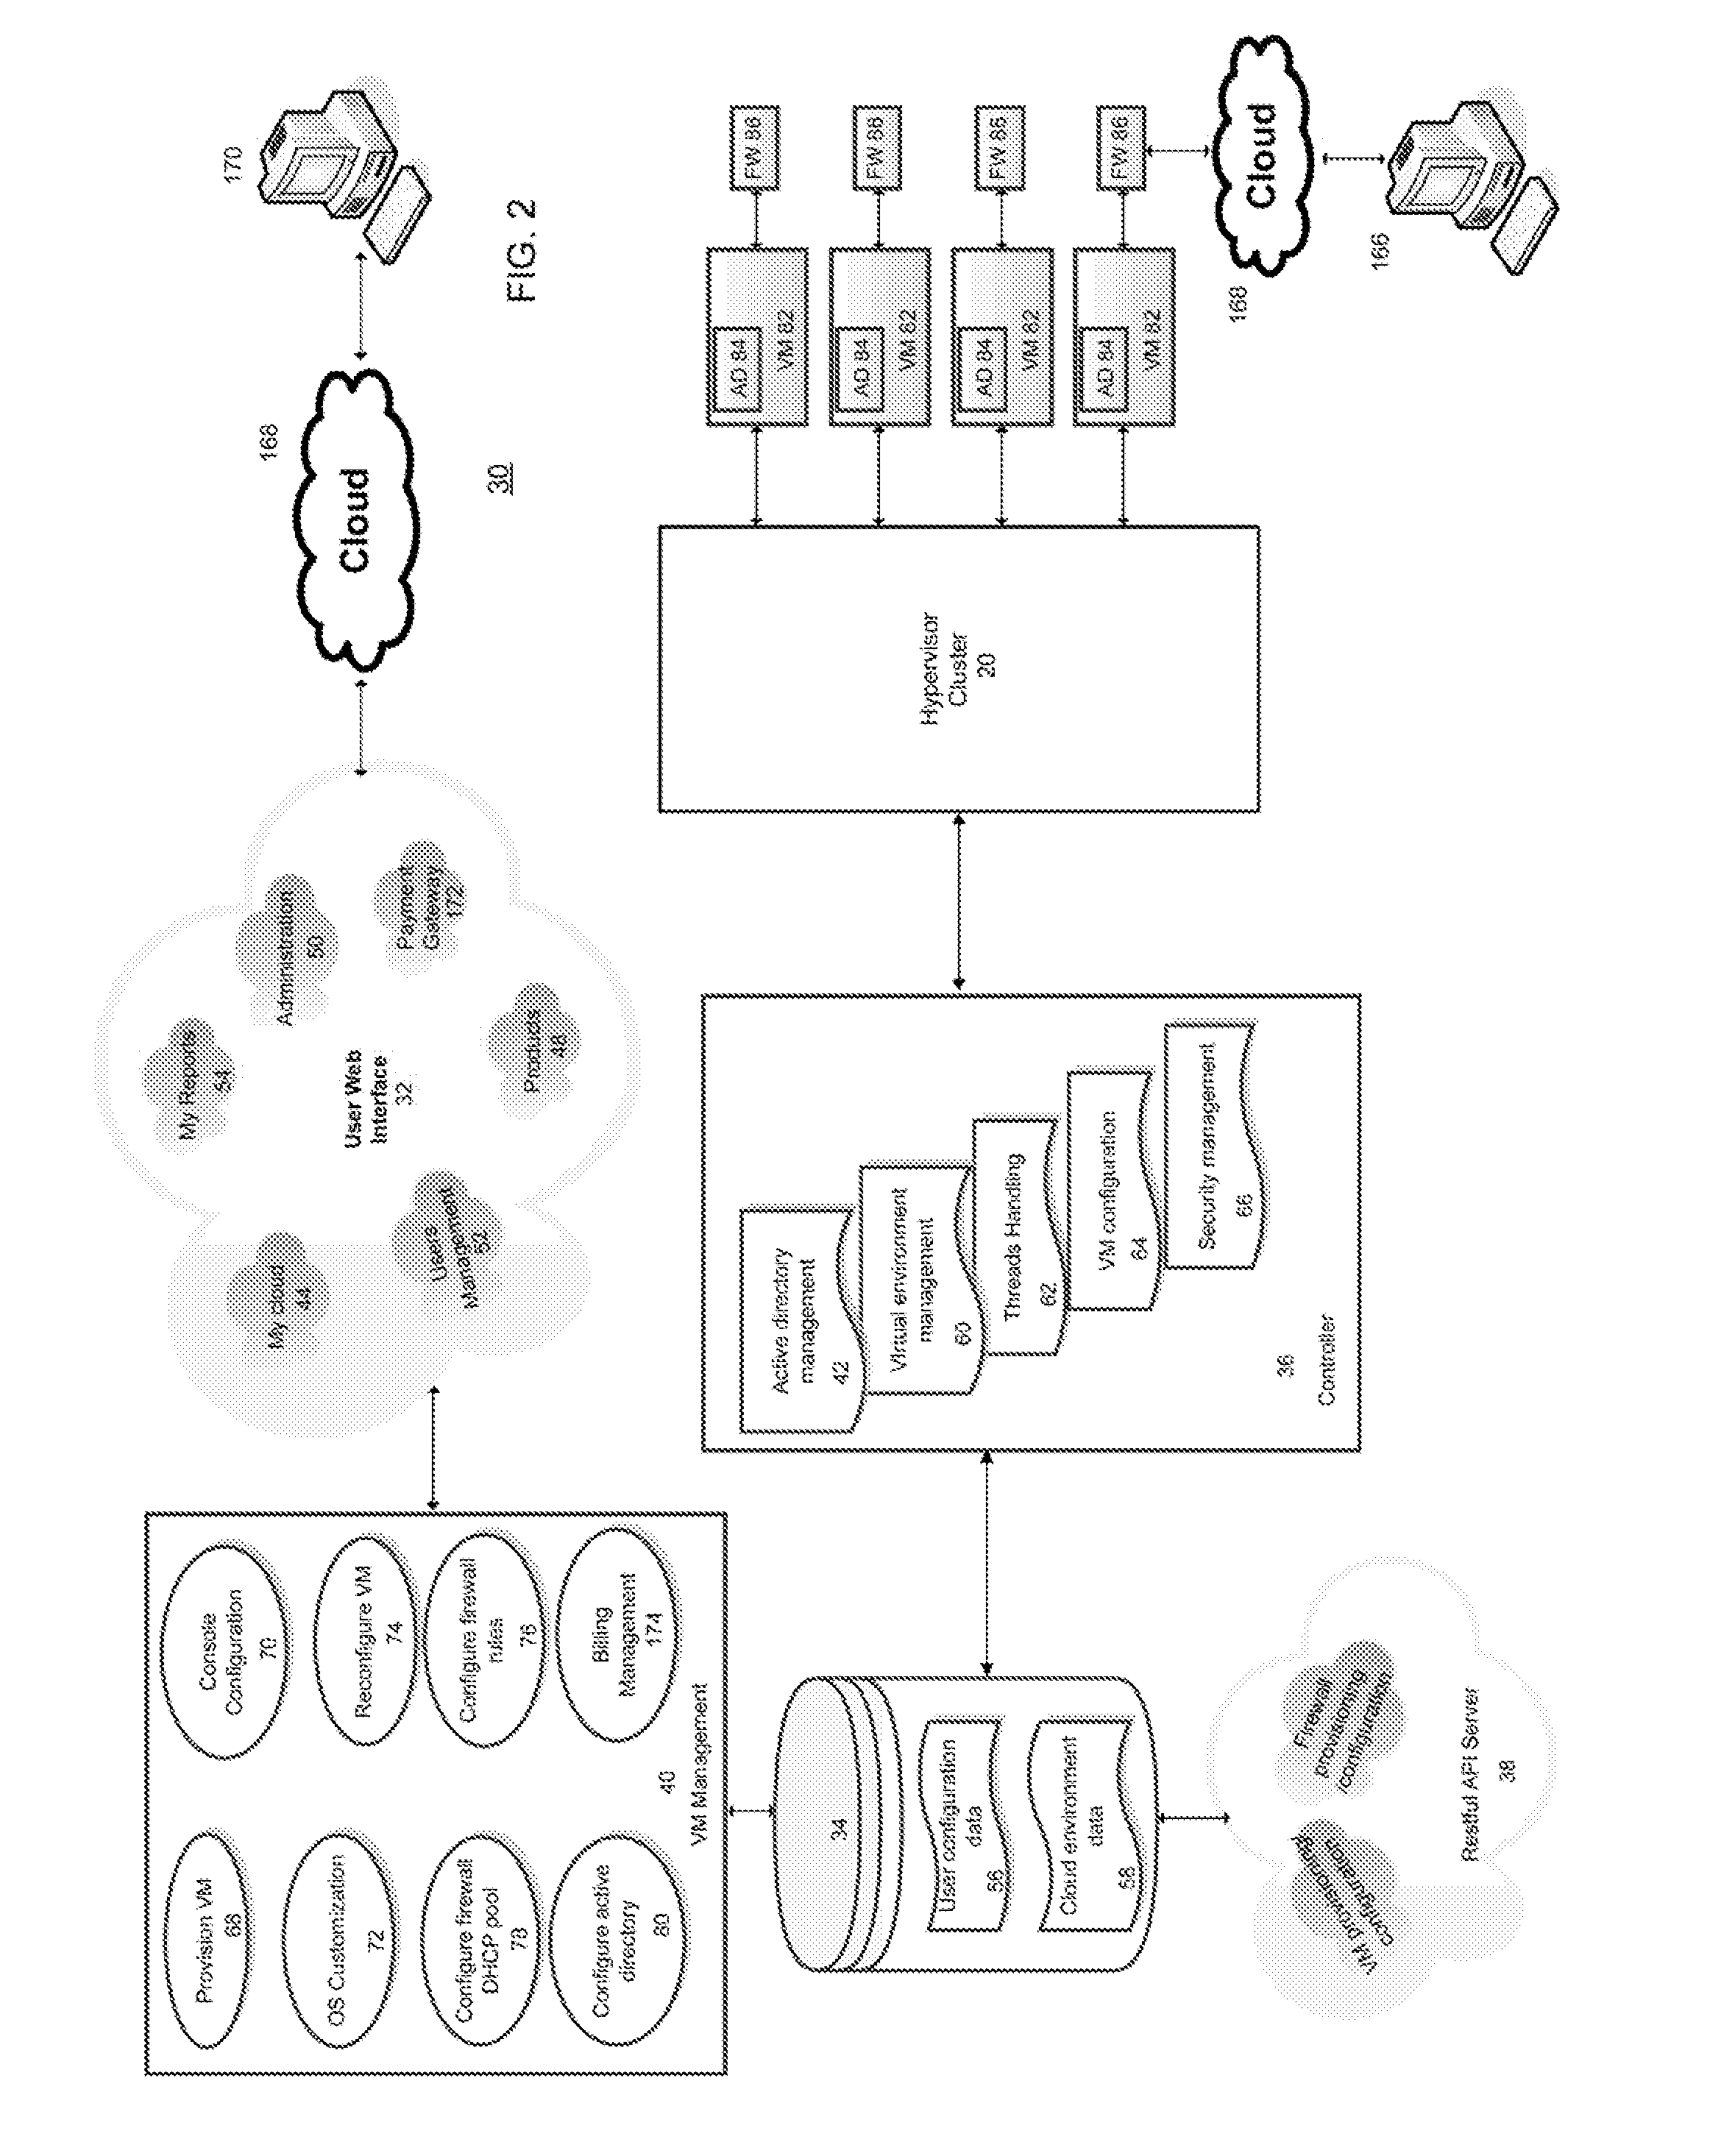 System and method for managing resources in a virtual machine environment